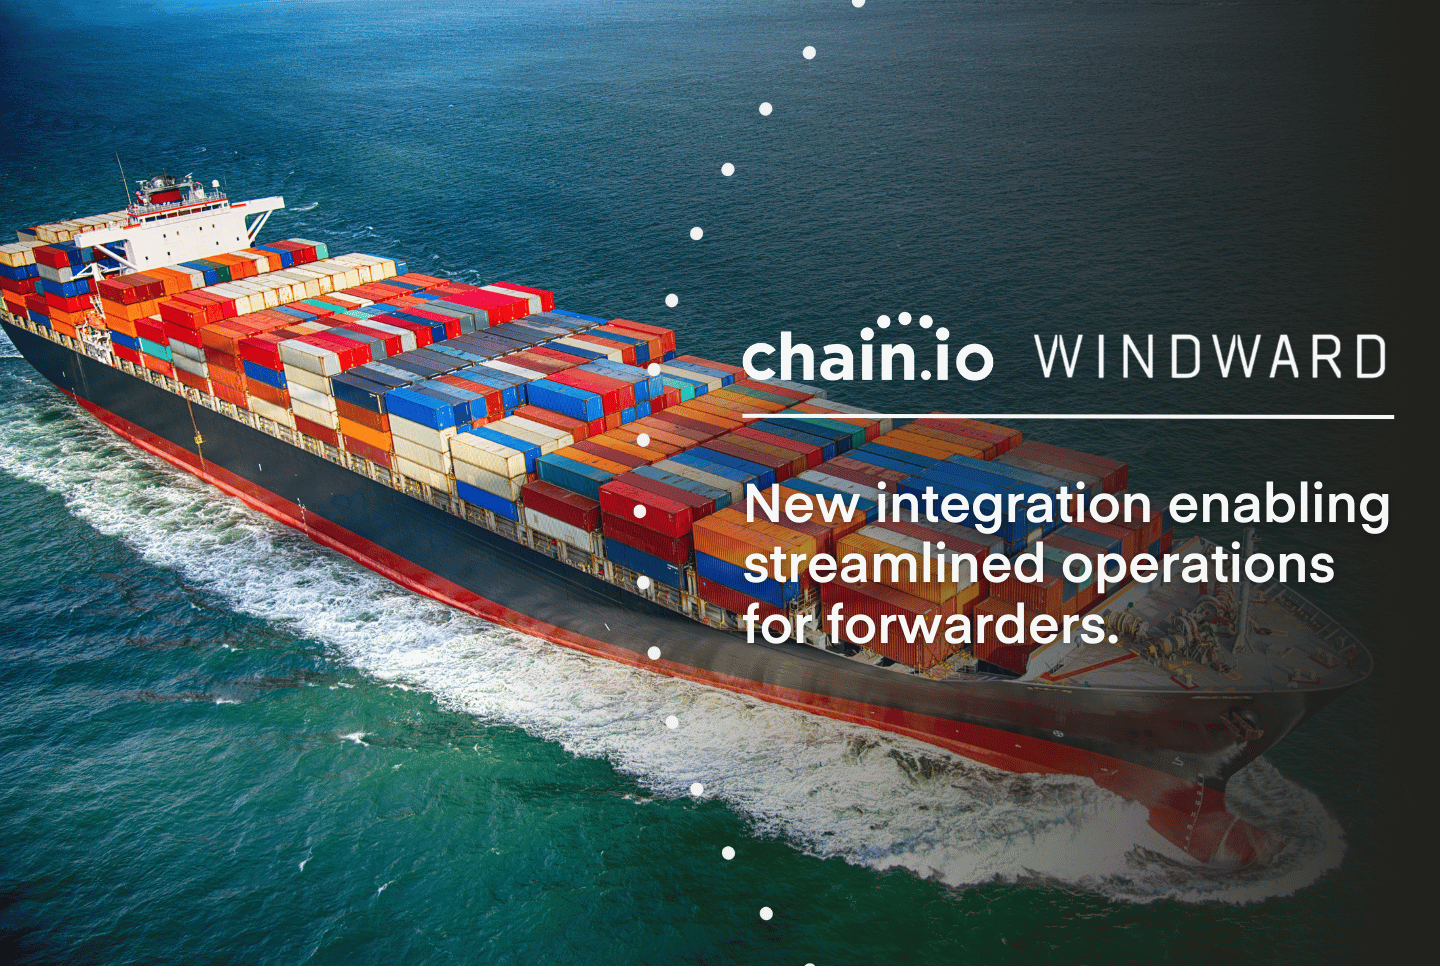 Chain.io will add Windward to its network in order to help forwarders overcome current and potential shipment disruptions